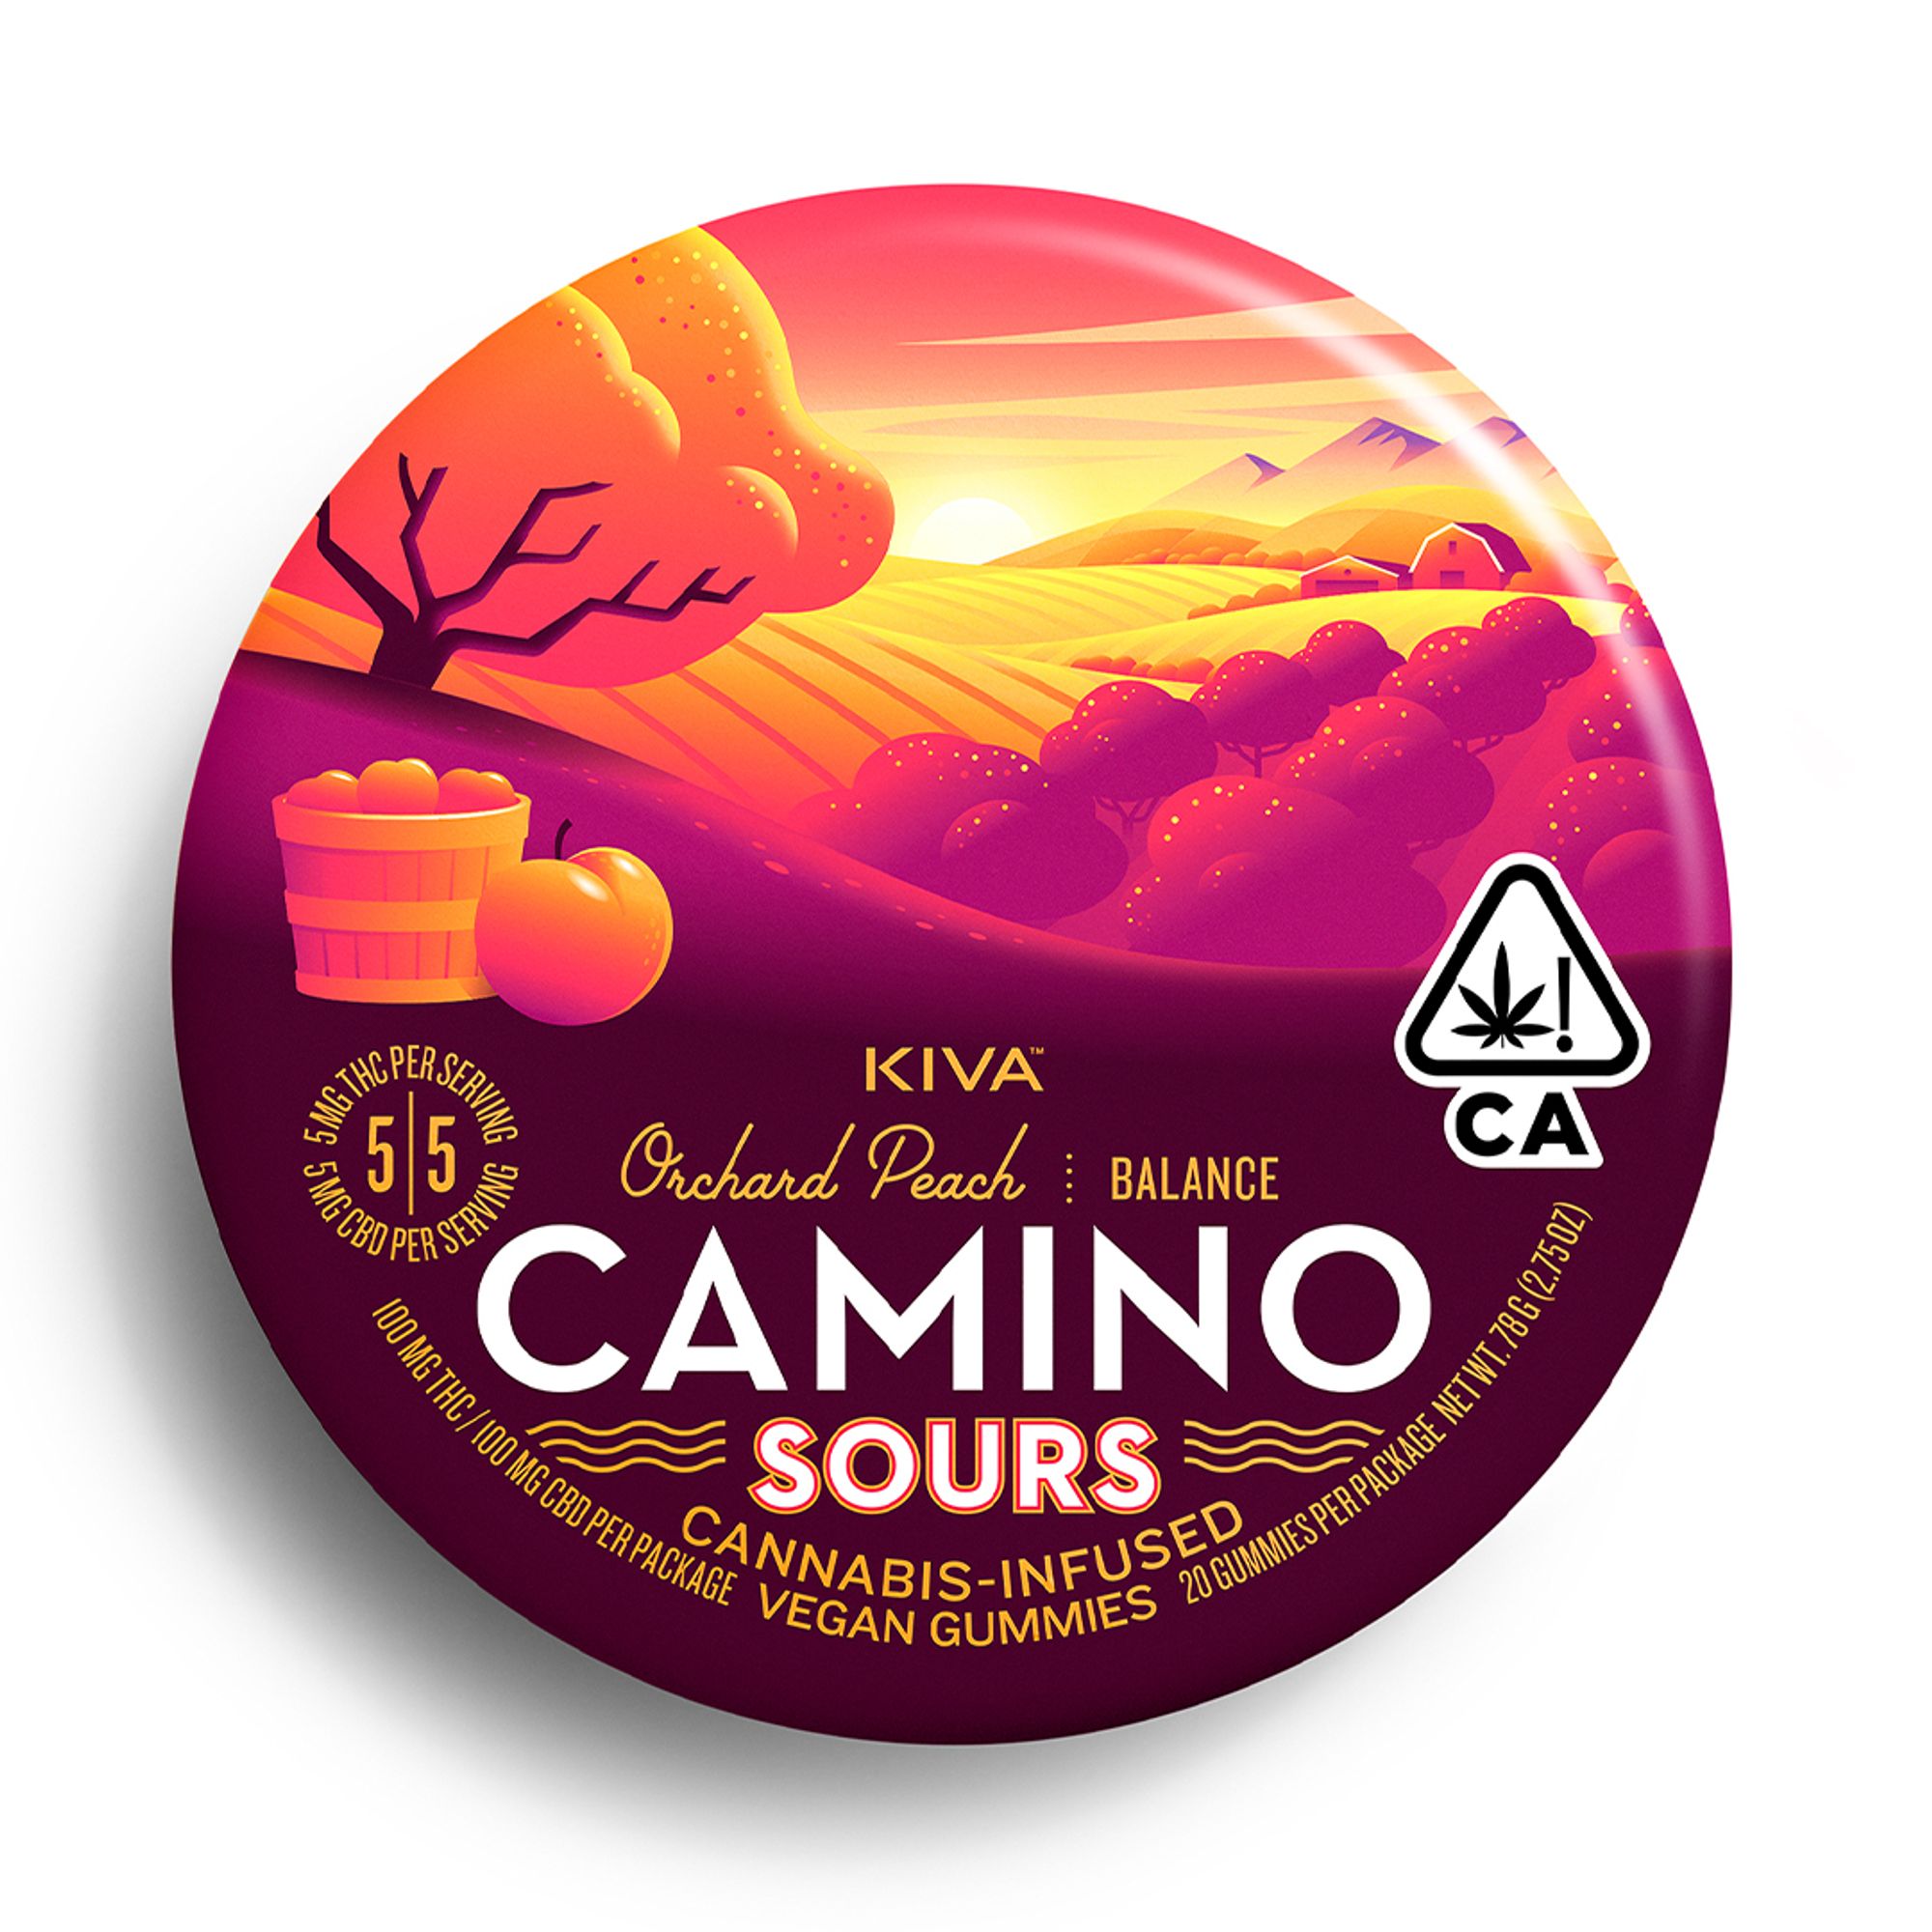 Camino Sours Orchard Peach